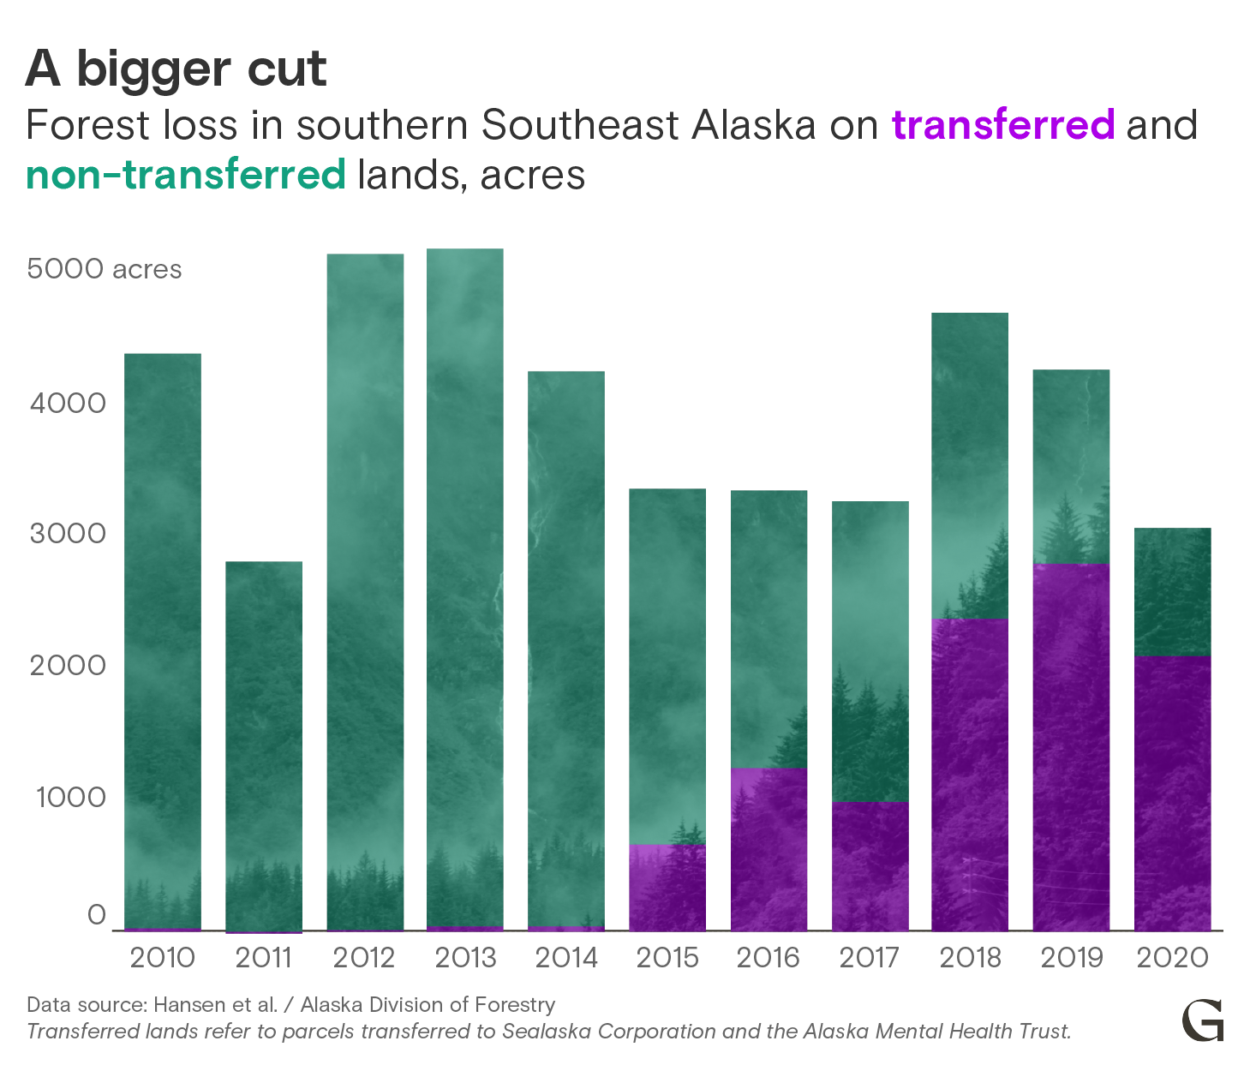 The amount of forest loss in Southeaster Alaska on transfered lands grew significantly from 2010 to 2020. 